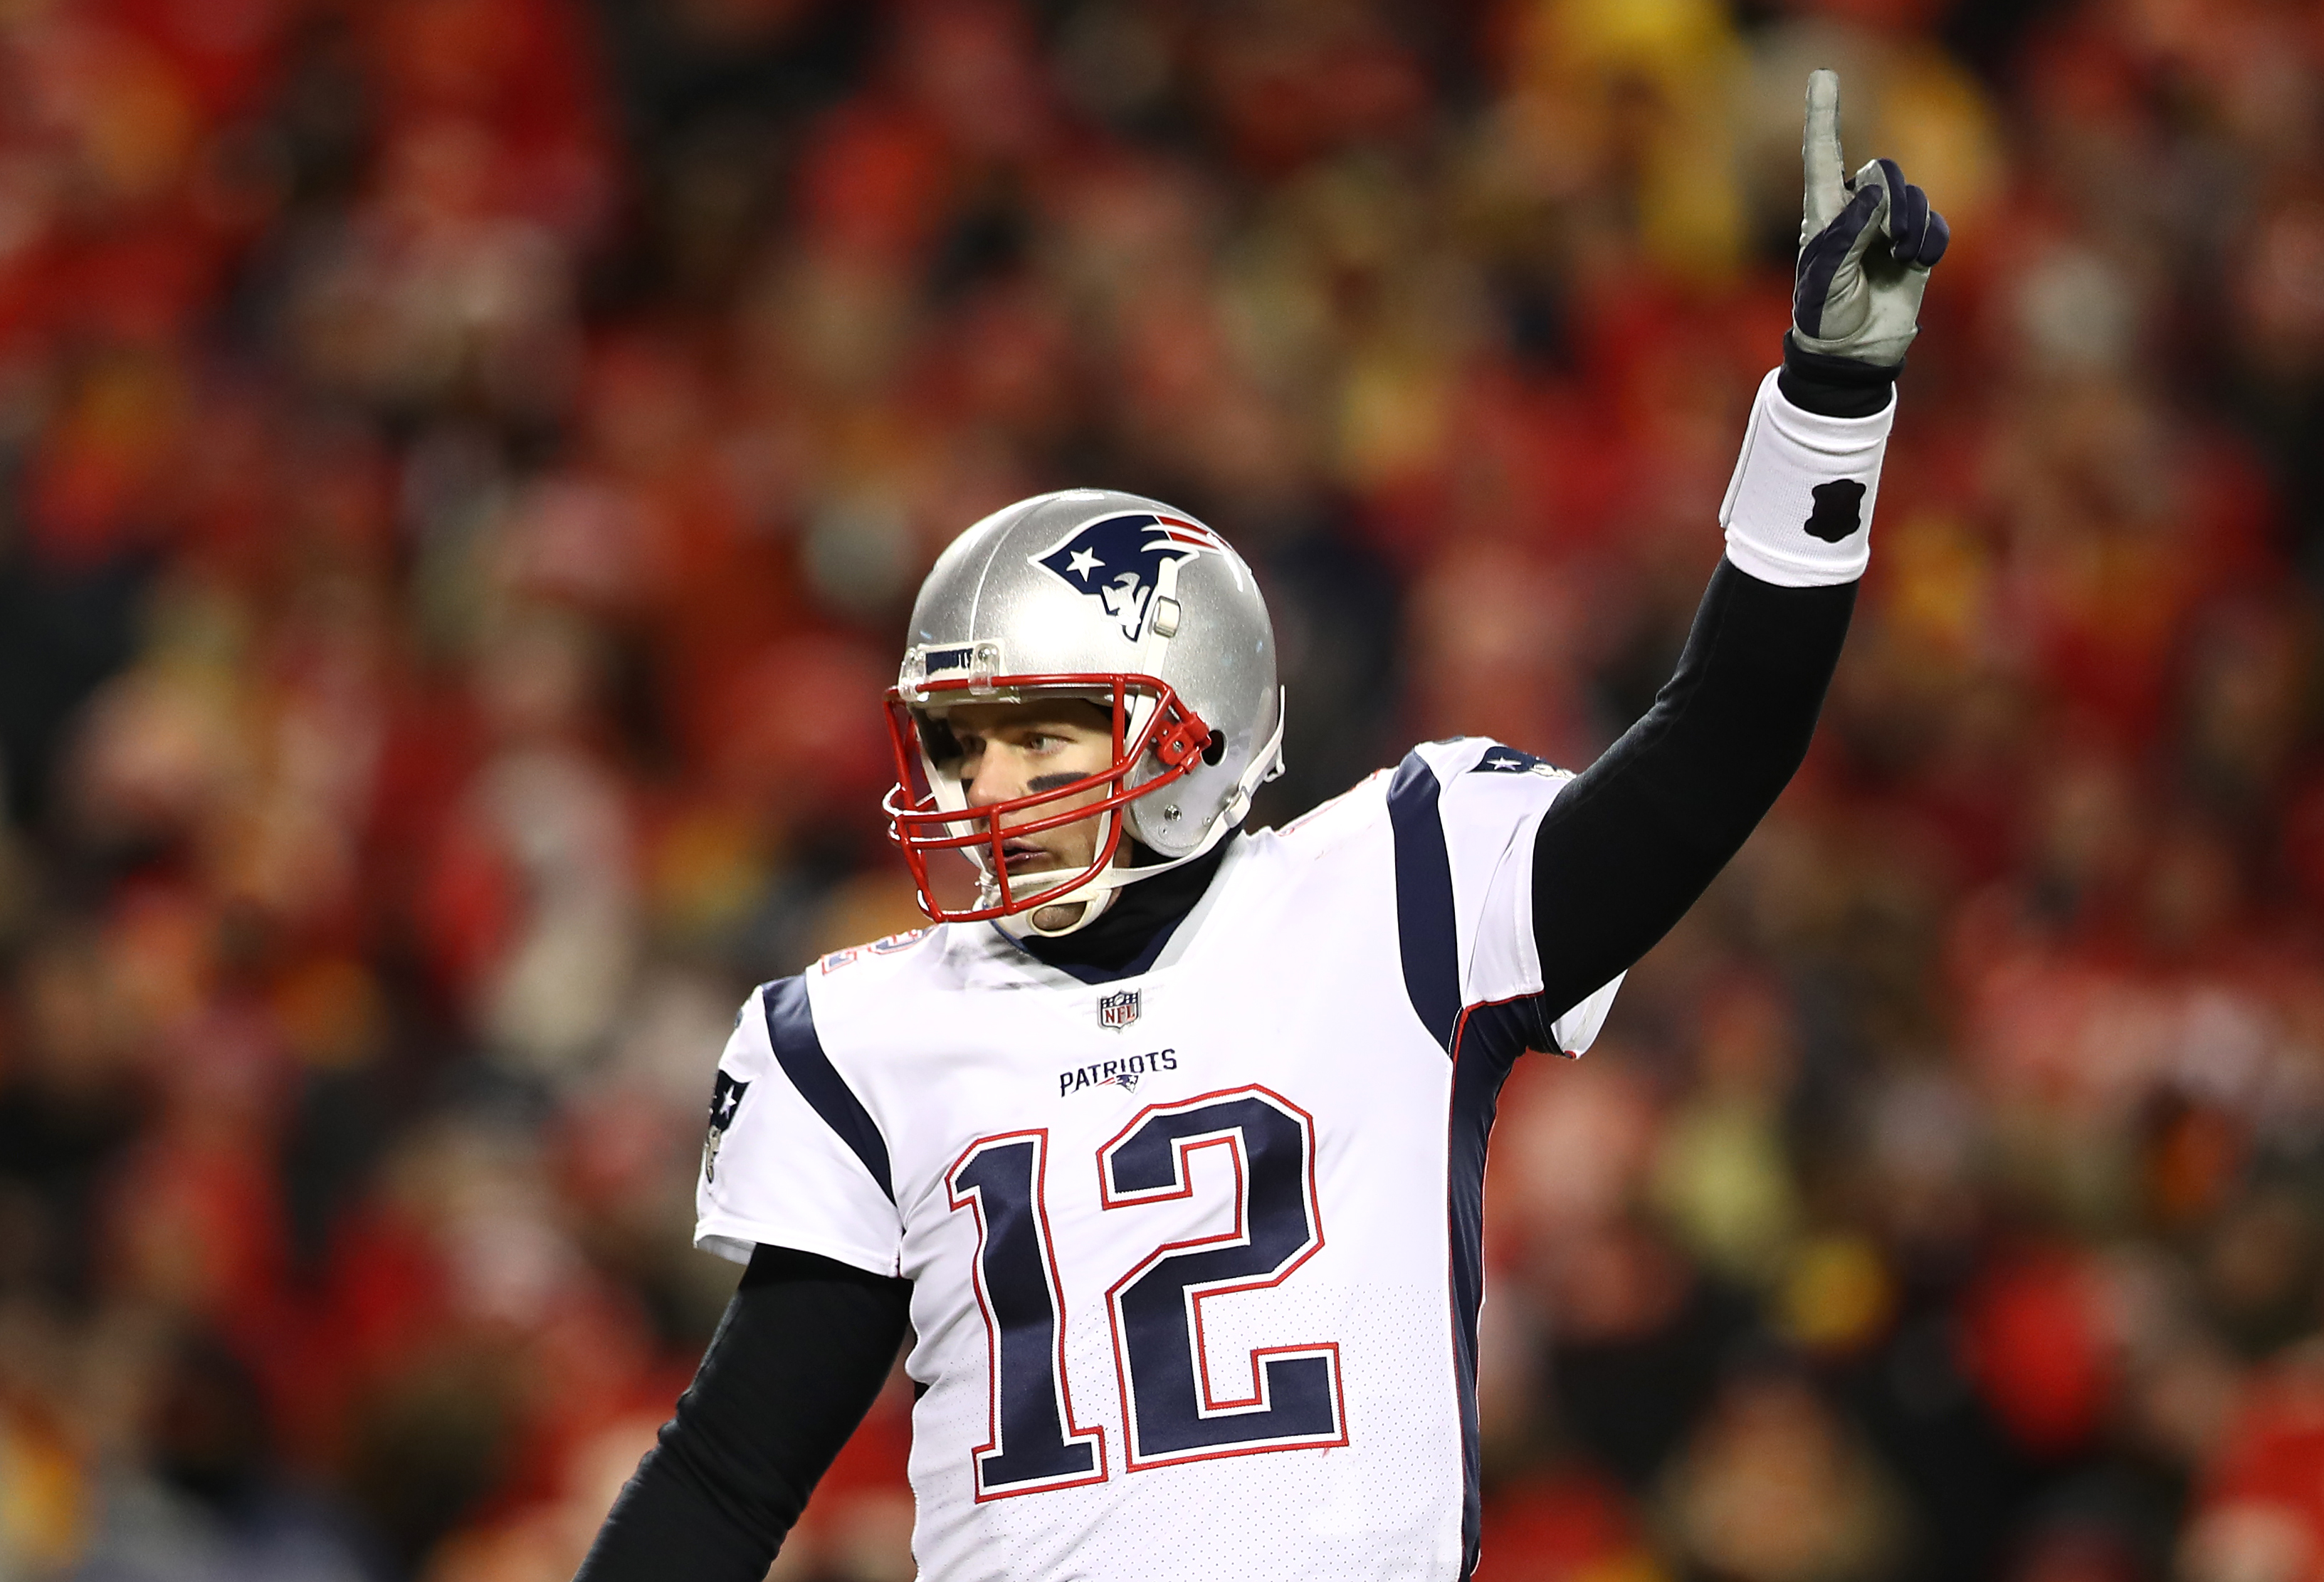 KANSAS CITY, MISSOURI - JANUARY 20: Tom Brady #12 of the New England Patriots gestures in the first half against the Kansas City Chiefs during the AFC Championship Game at Arrowhead Stadium on January 20, 2019 in Kansas City, Missouri. (Photo by Ronald Martinez/Getty Images) (Ronald Martinez&mdash;Getty Images)